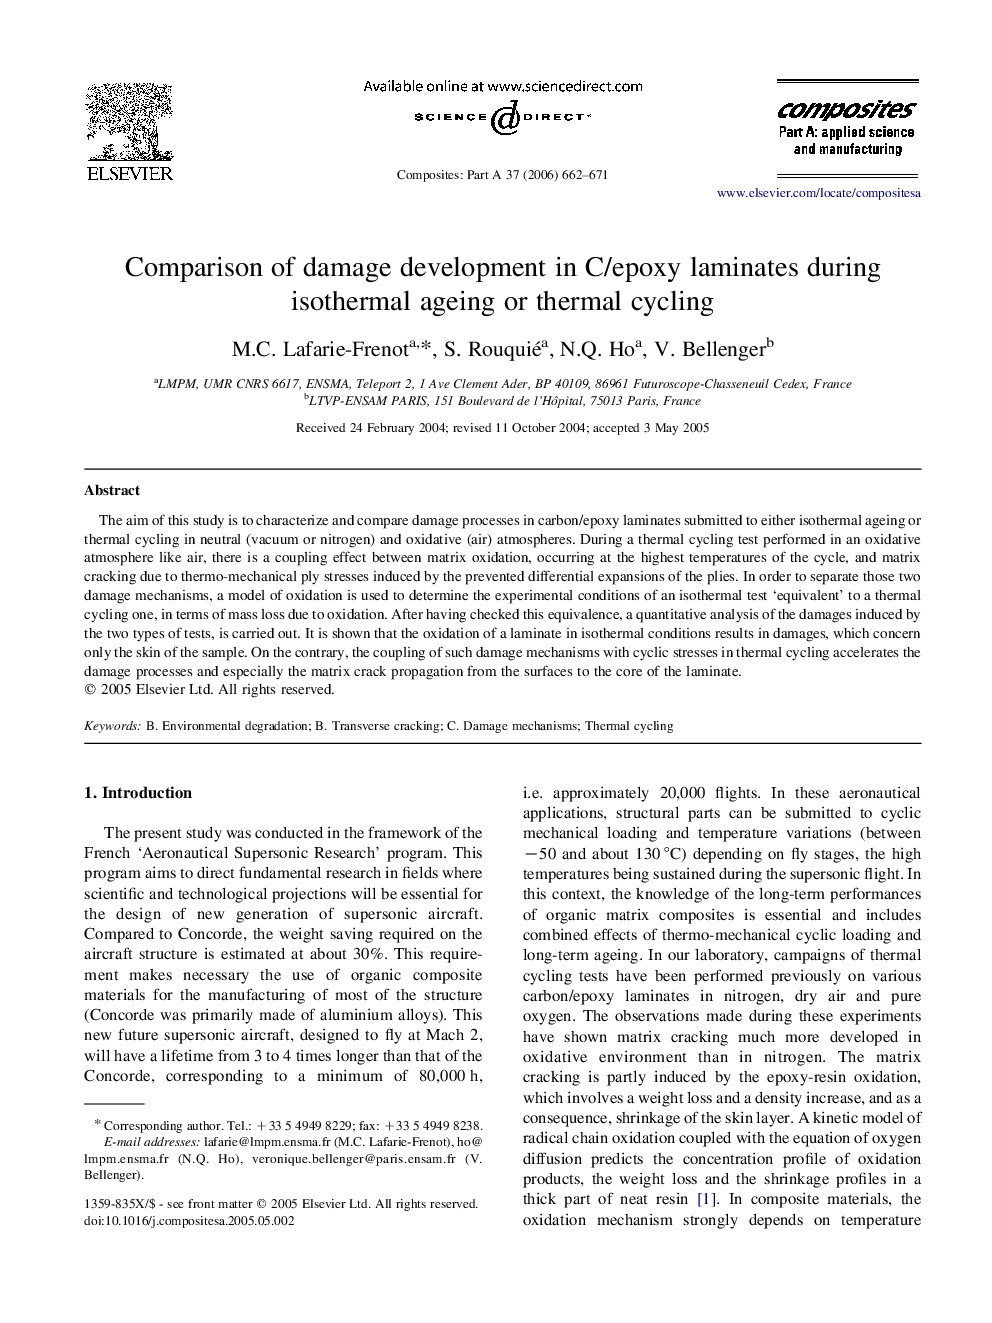 Comparison of damage development in C/epoxy laminates during isothermal ageing or thermal cycling